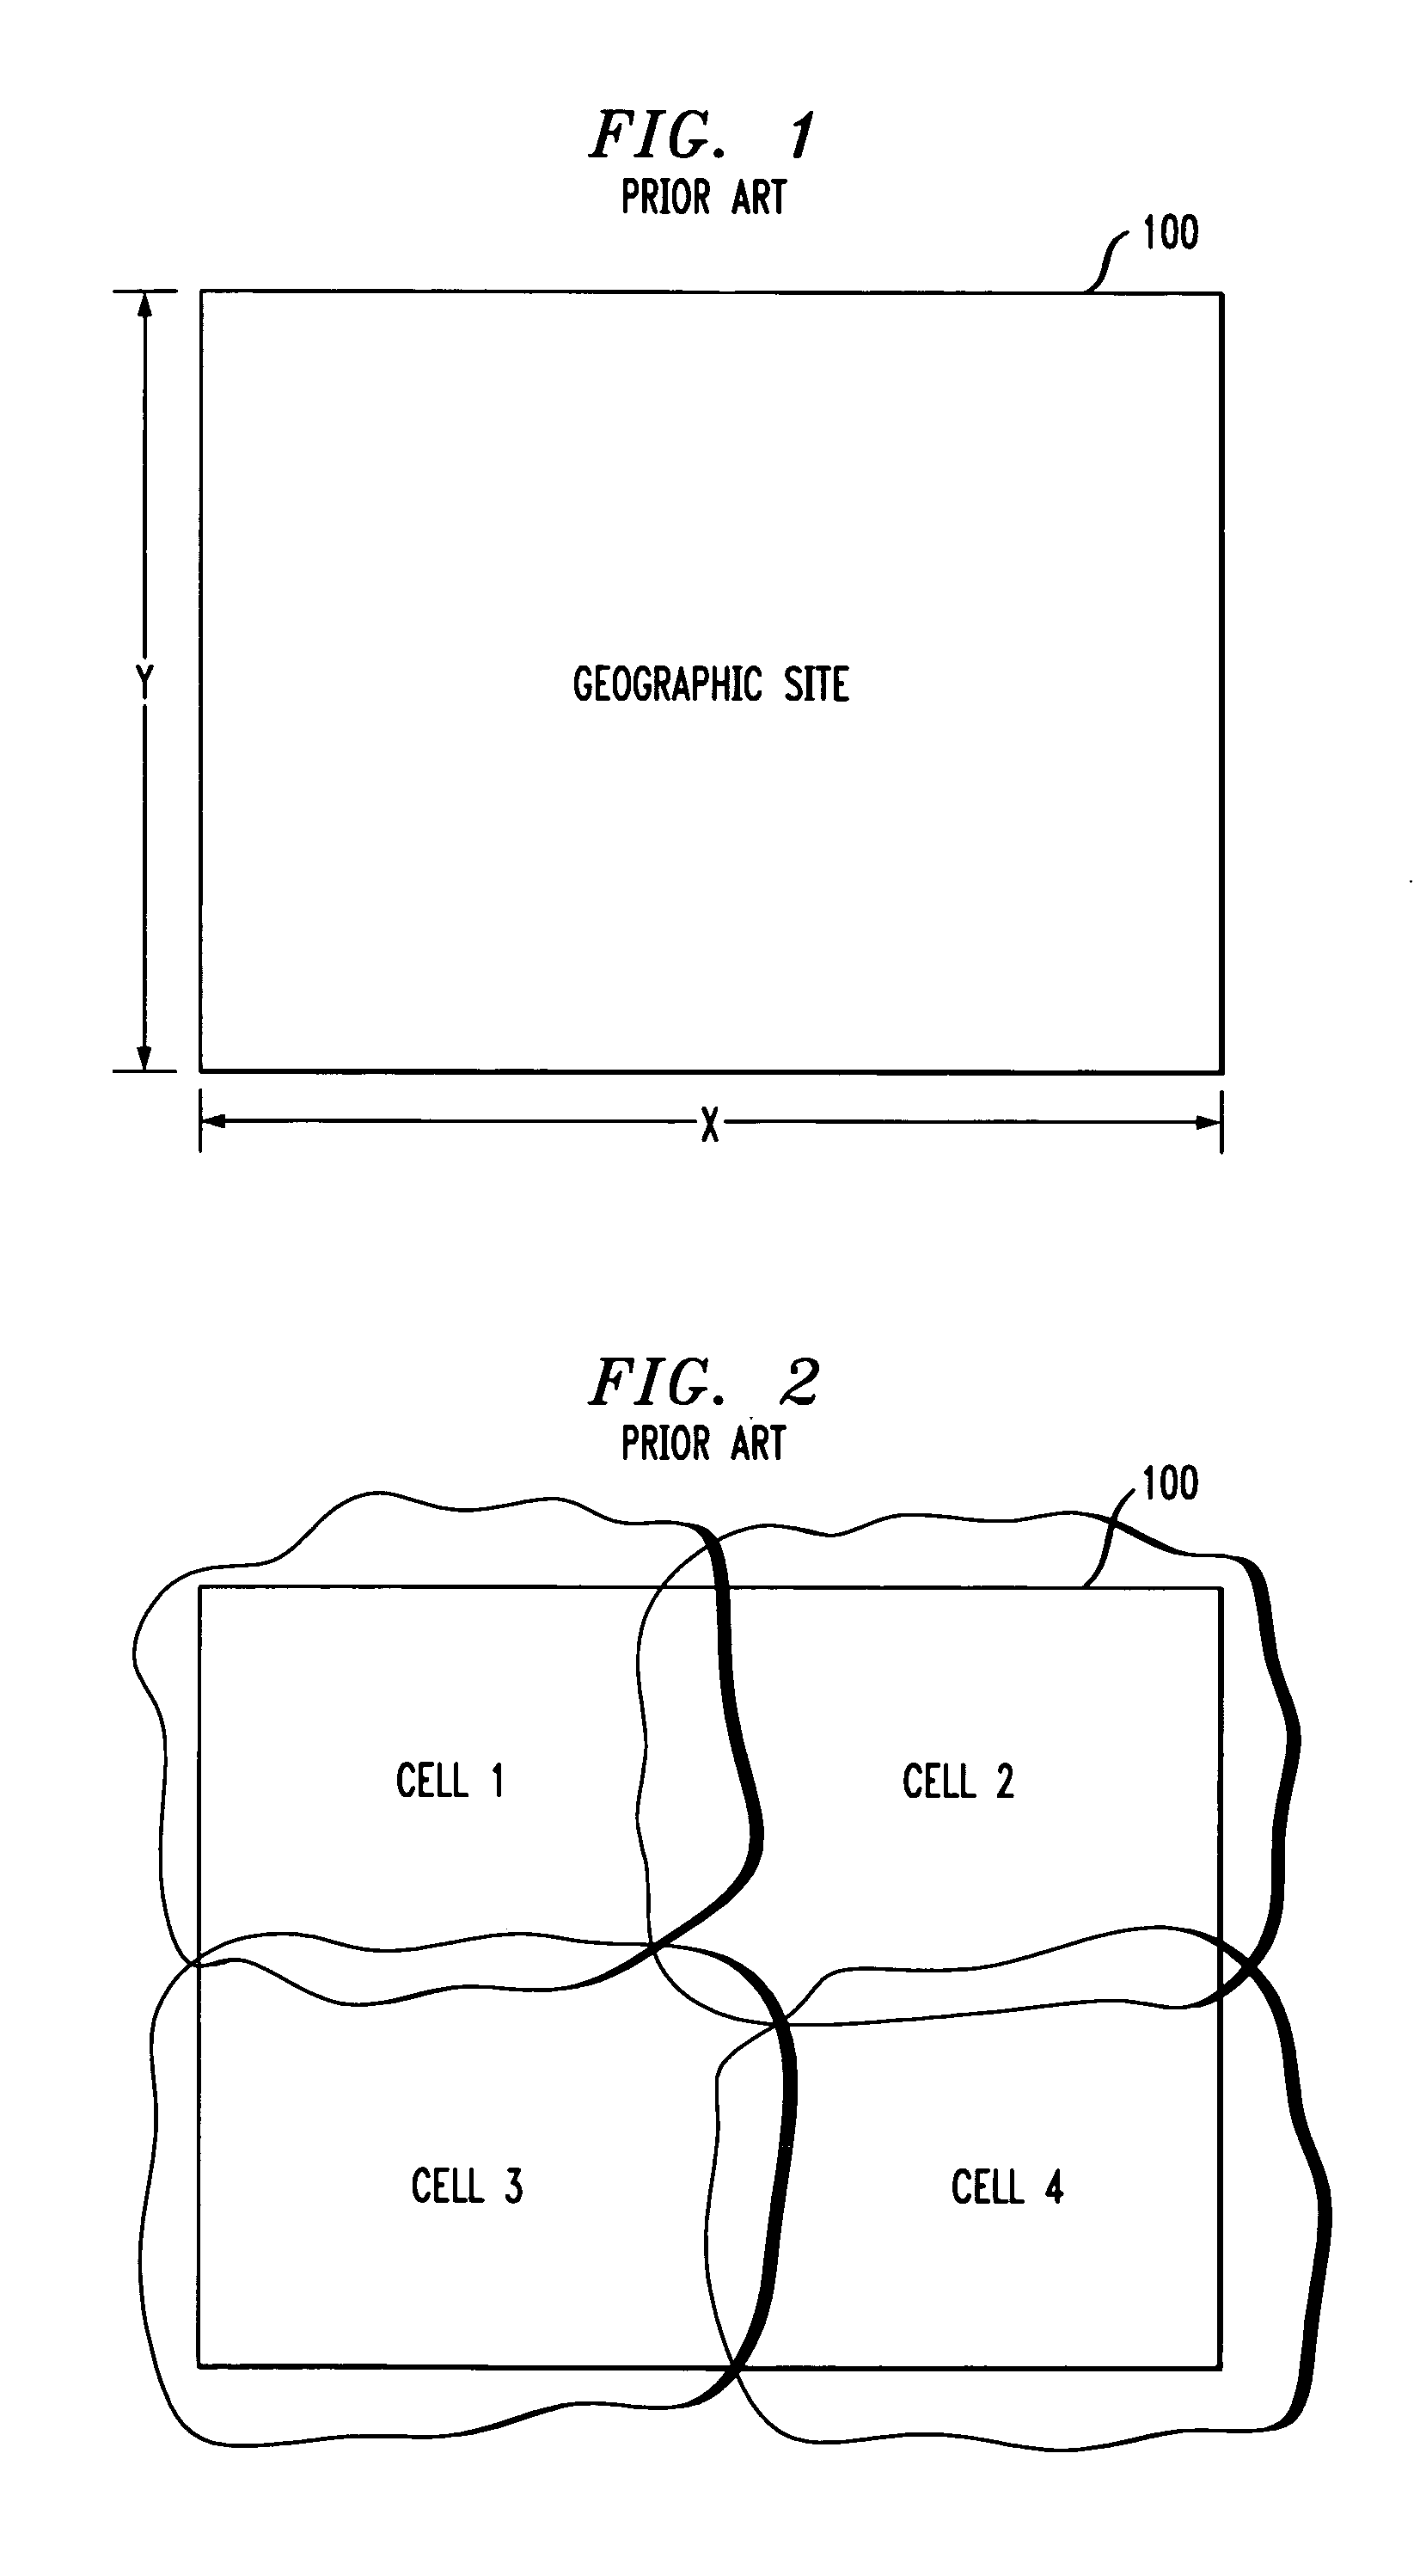 Measurement and antenna placement tool for establishing a cell site